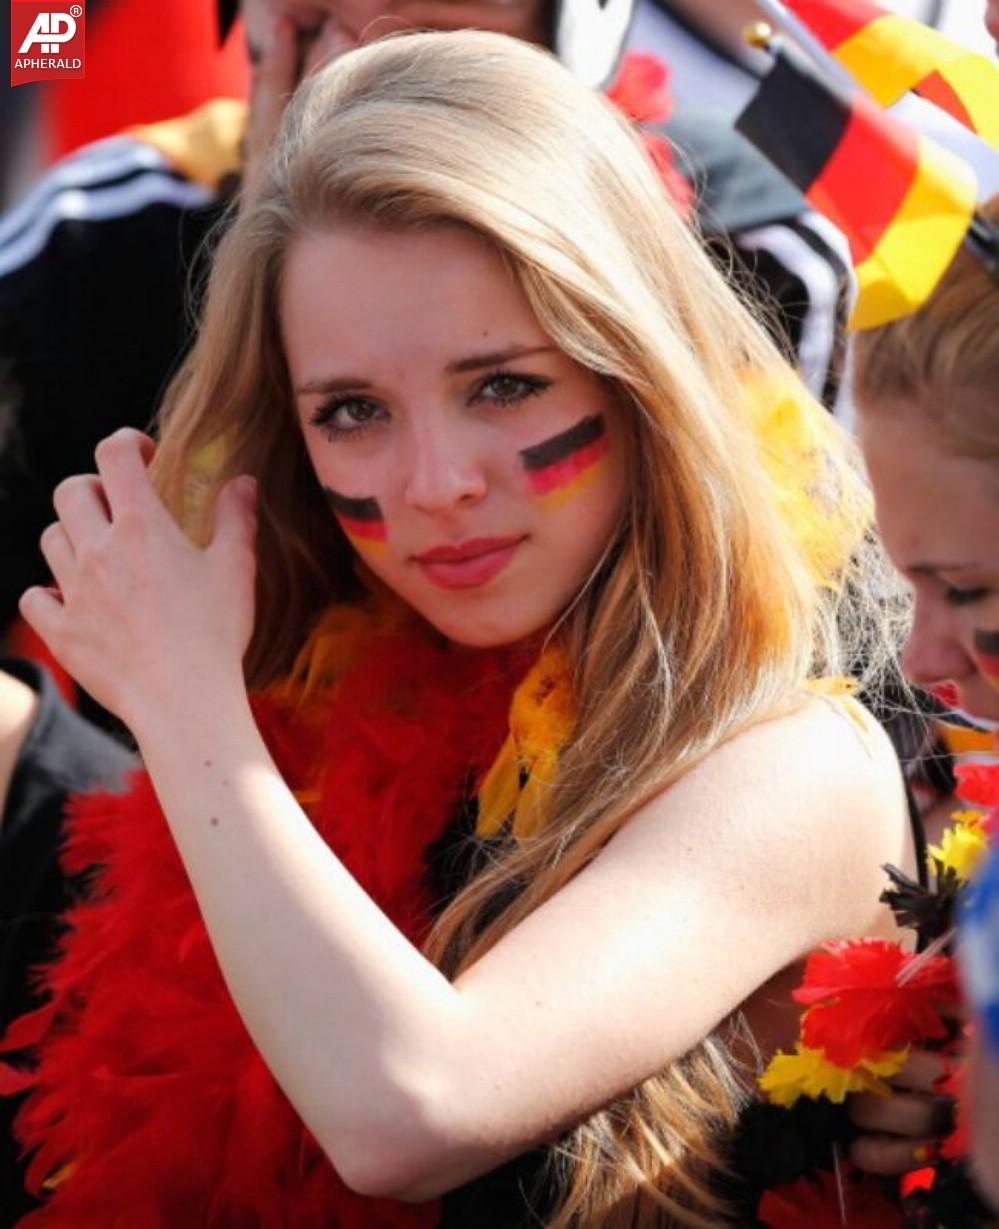 FIFA World Cup 2014 Fans With Face Paint